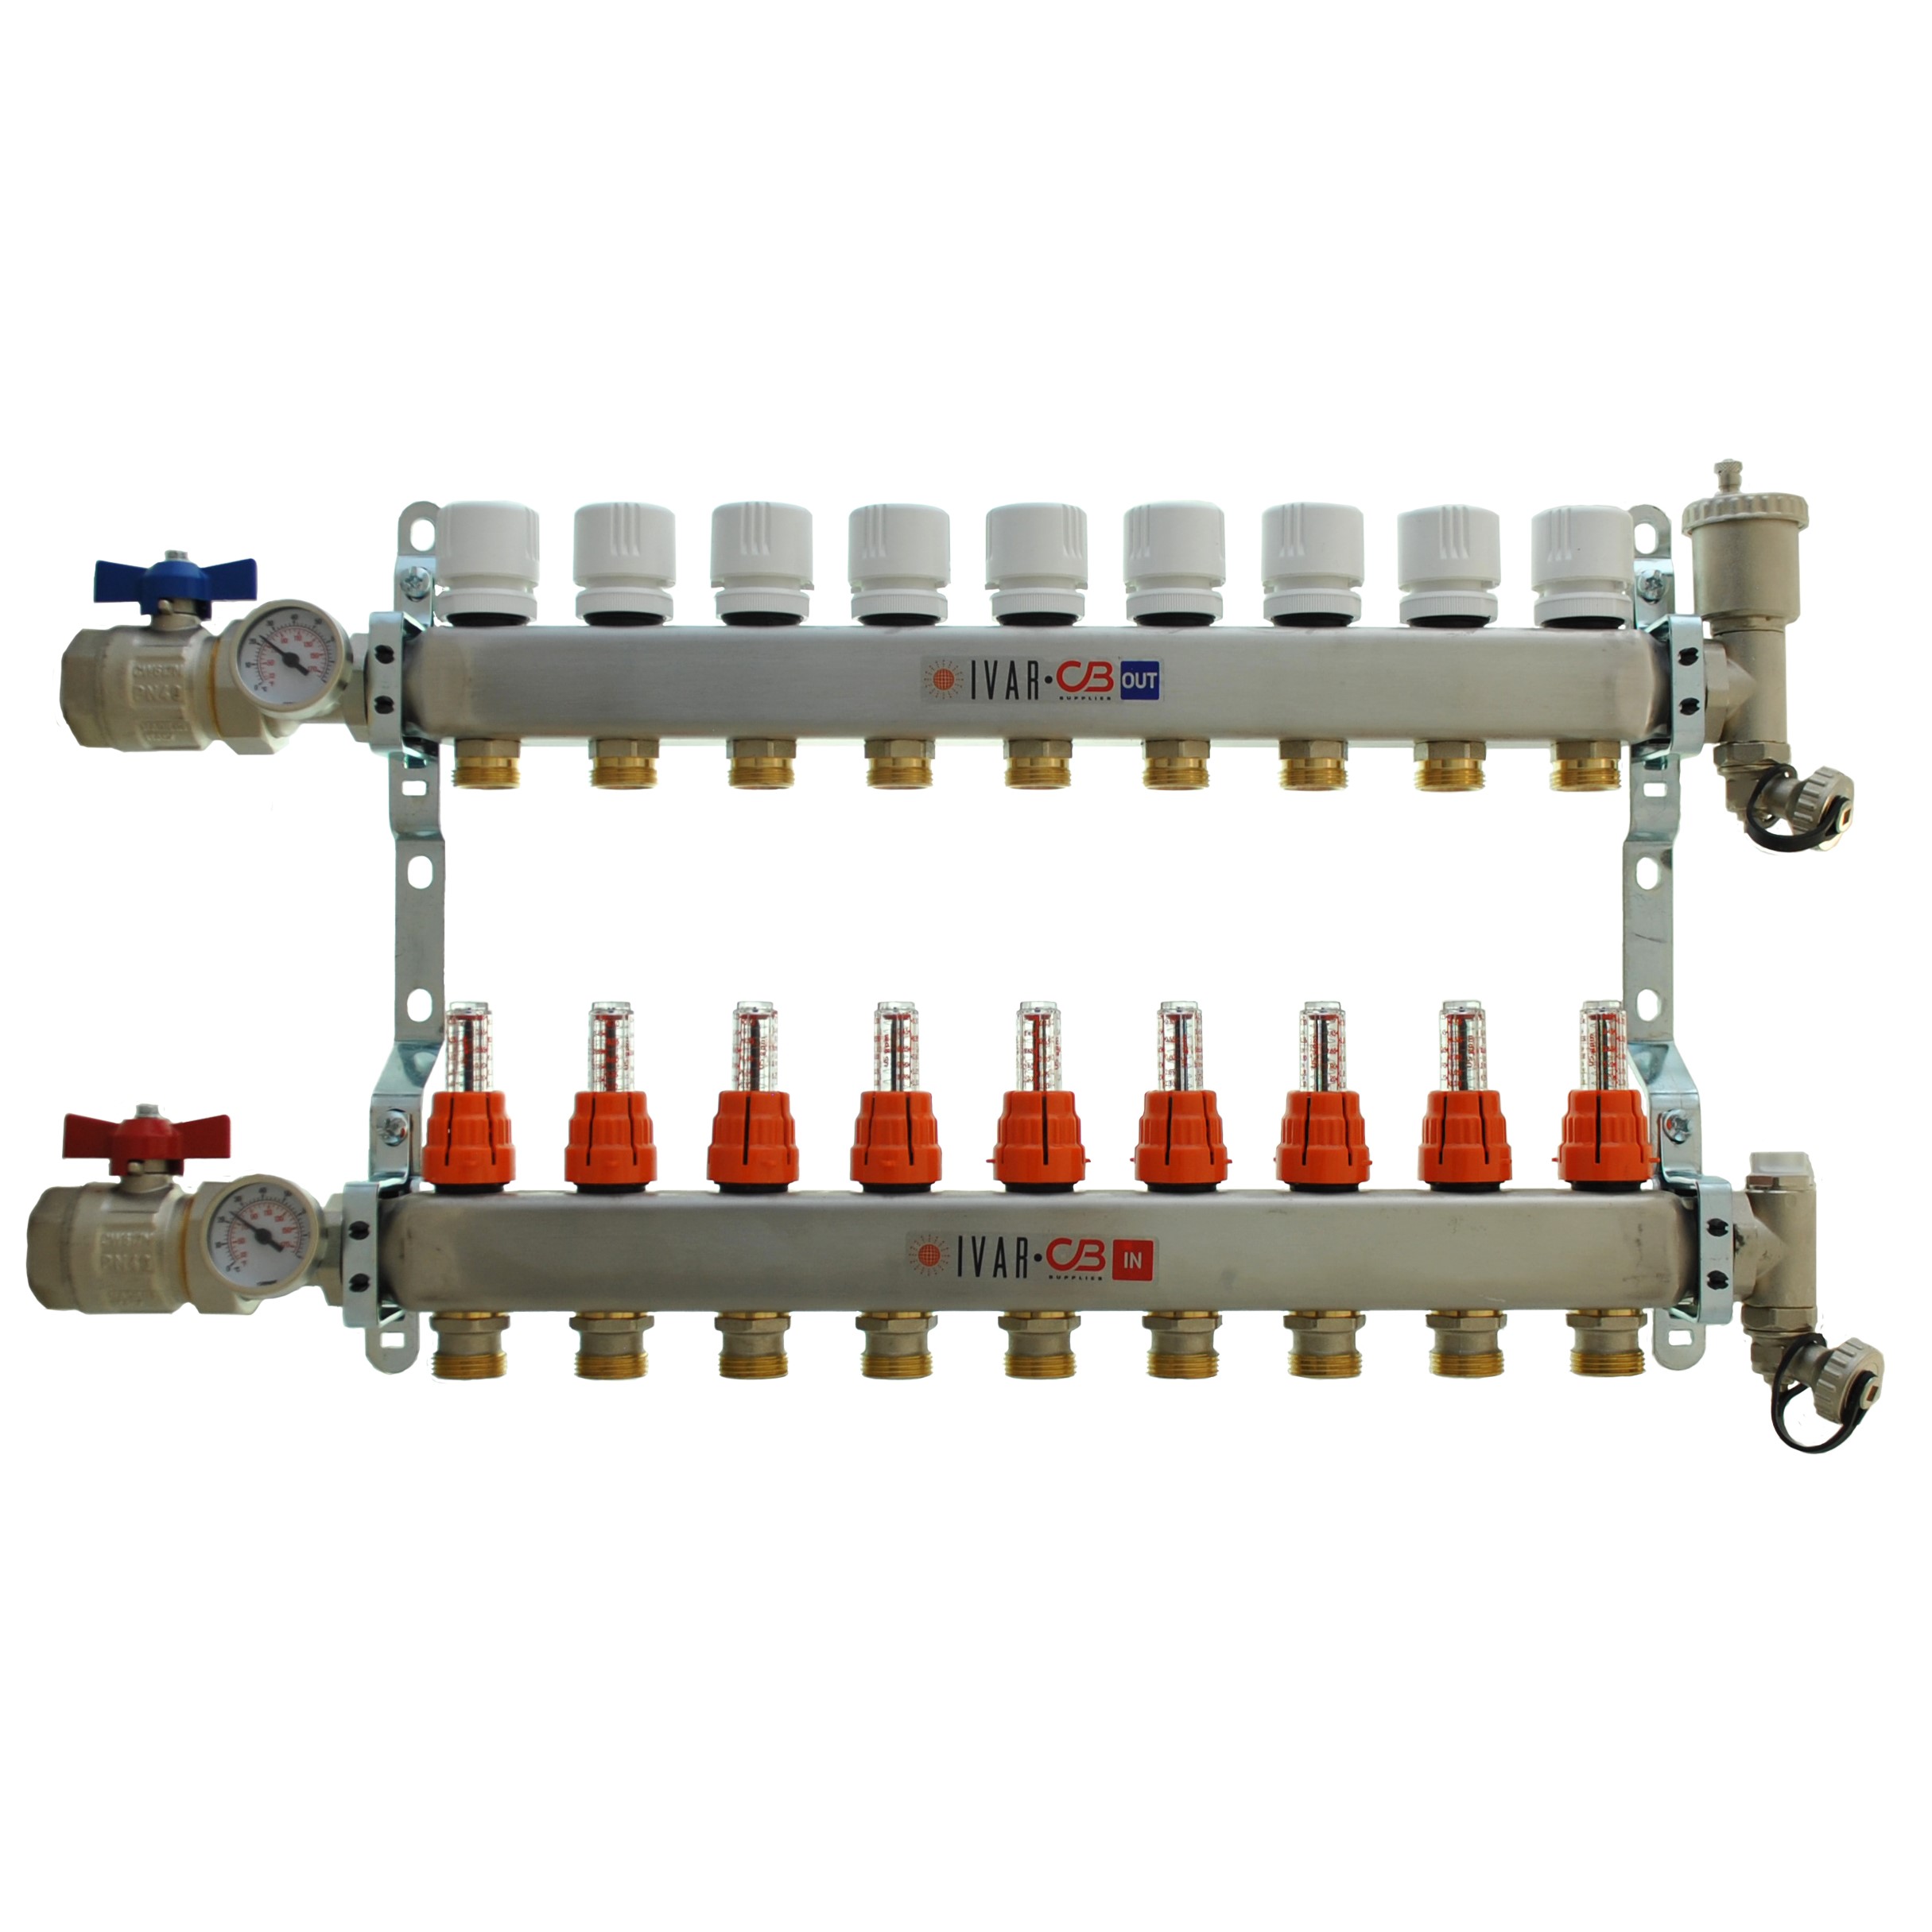 1" IVAR Stainless Steel Hydronic Manifold for Radiant Floor Heating - 9 ports